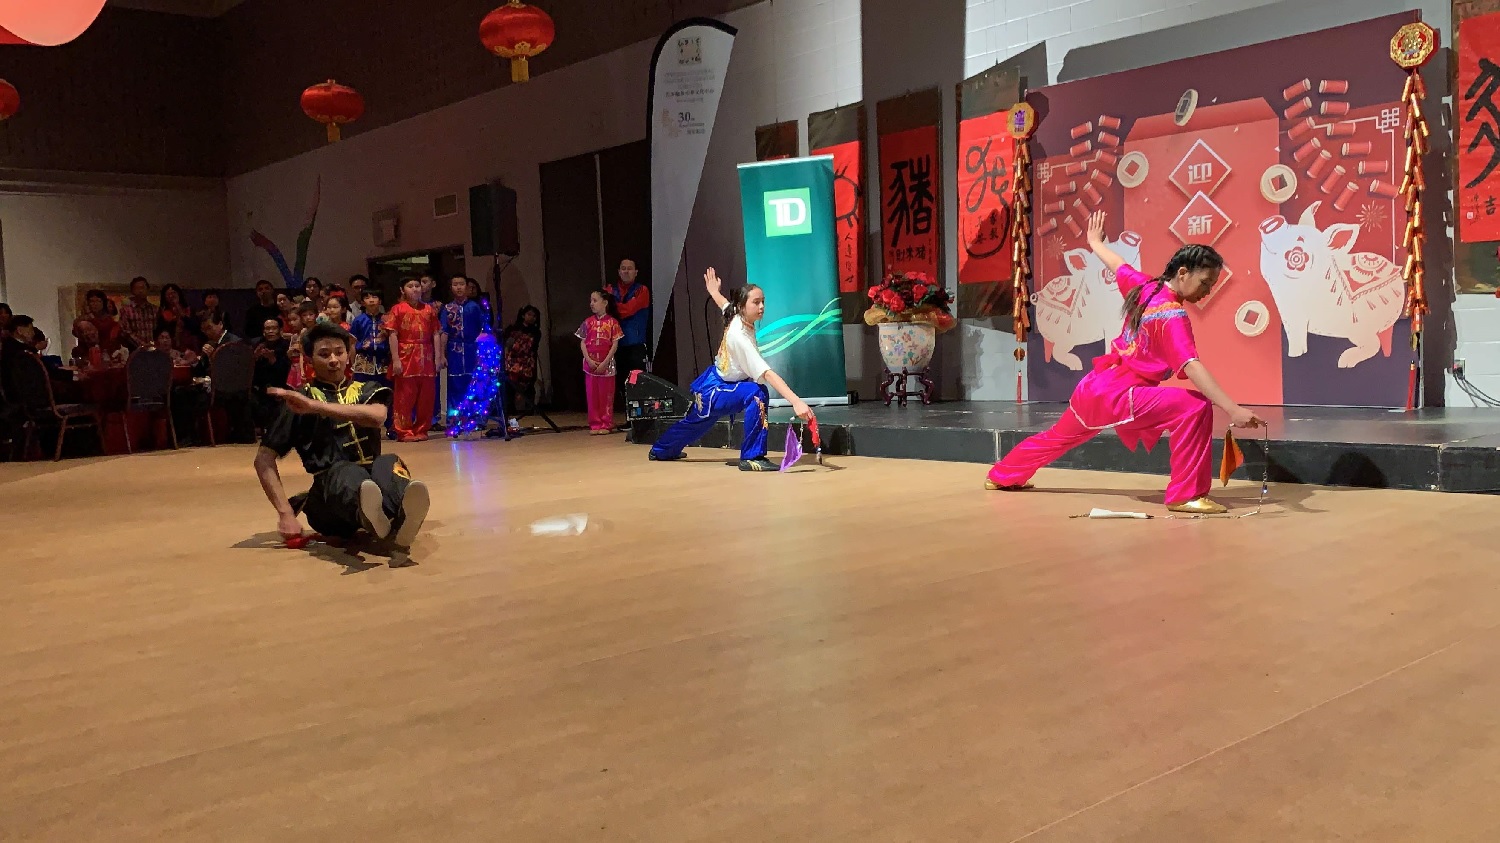 wayland-li-wushu-year-of-the-pig-dinner-chinese-cultural-centre-2019-06.jpg